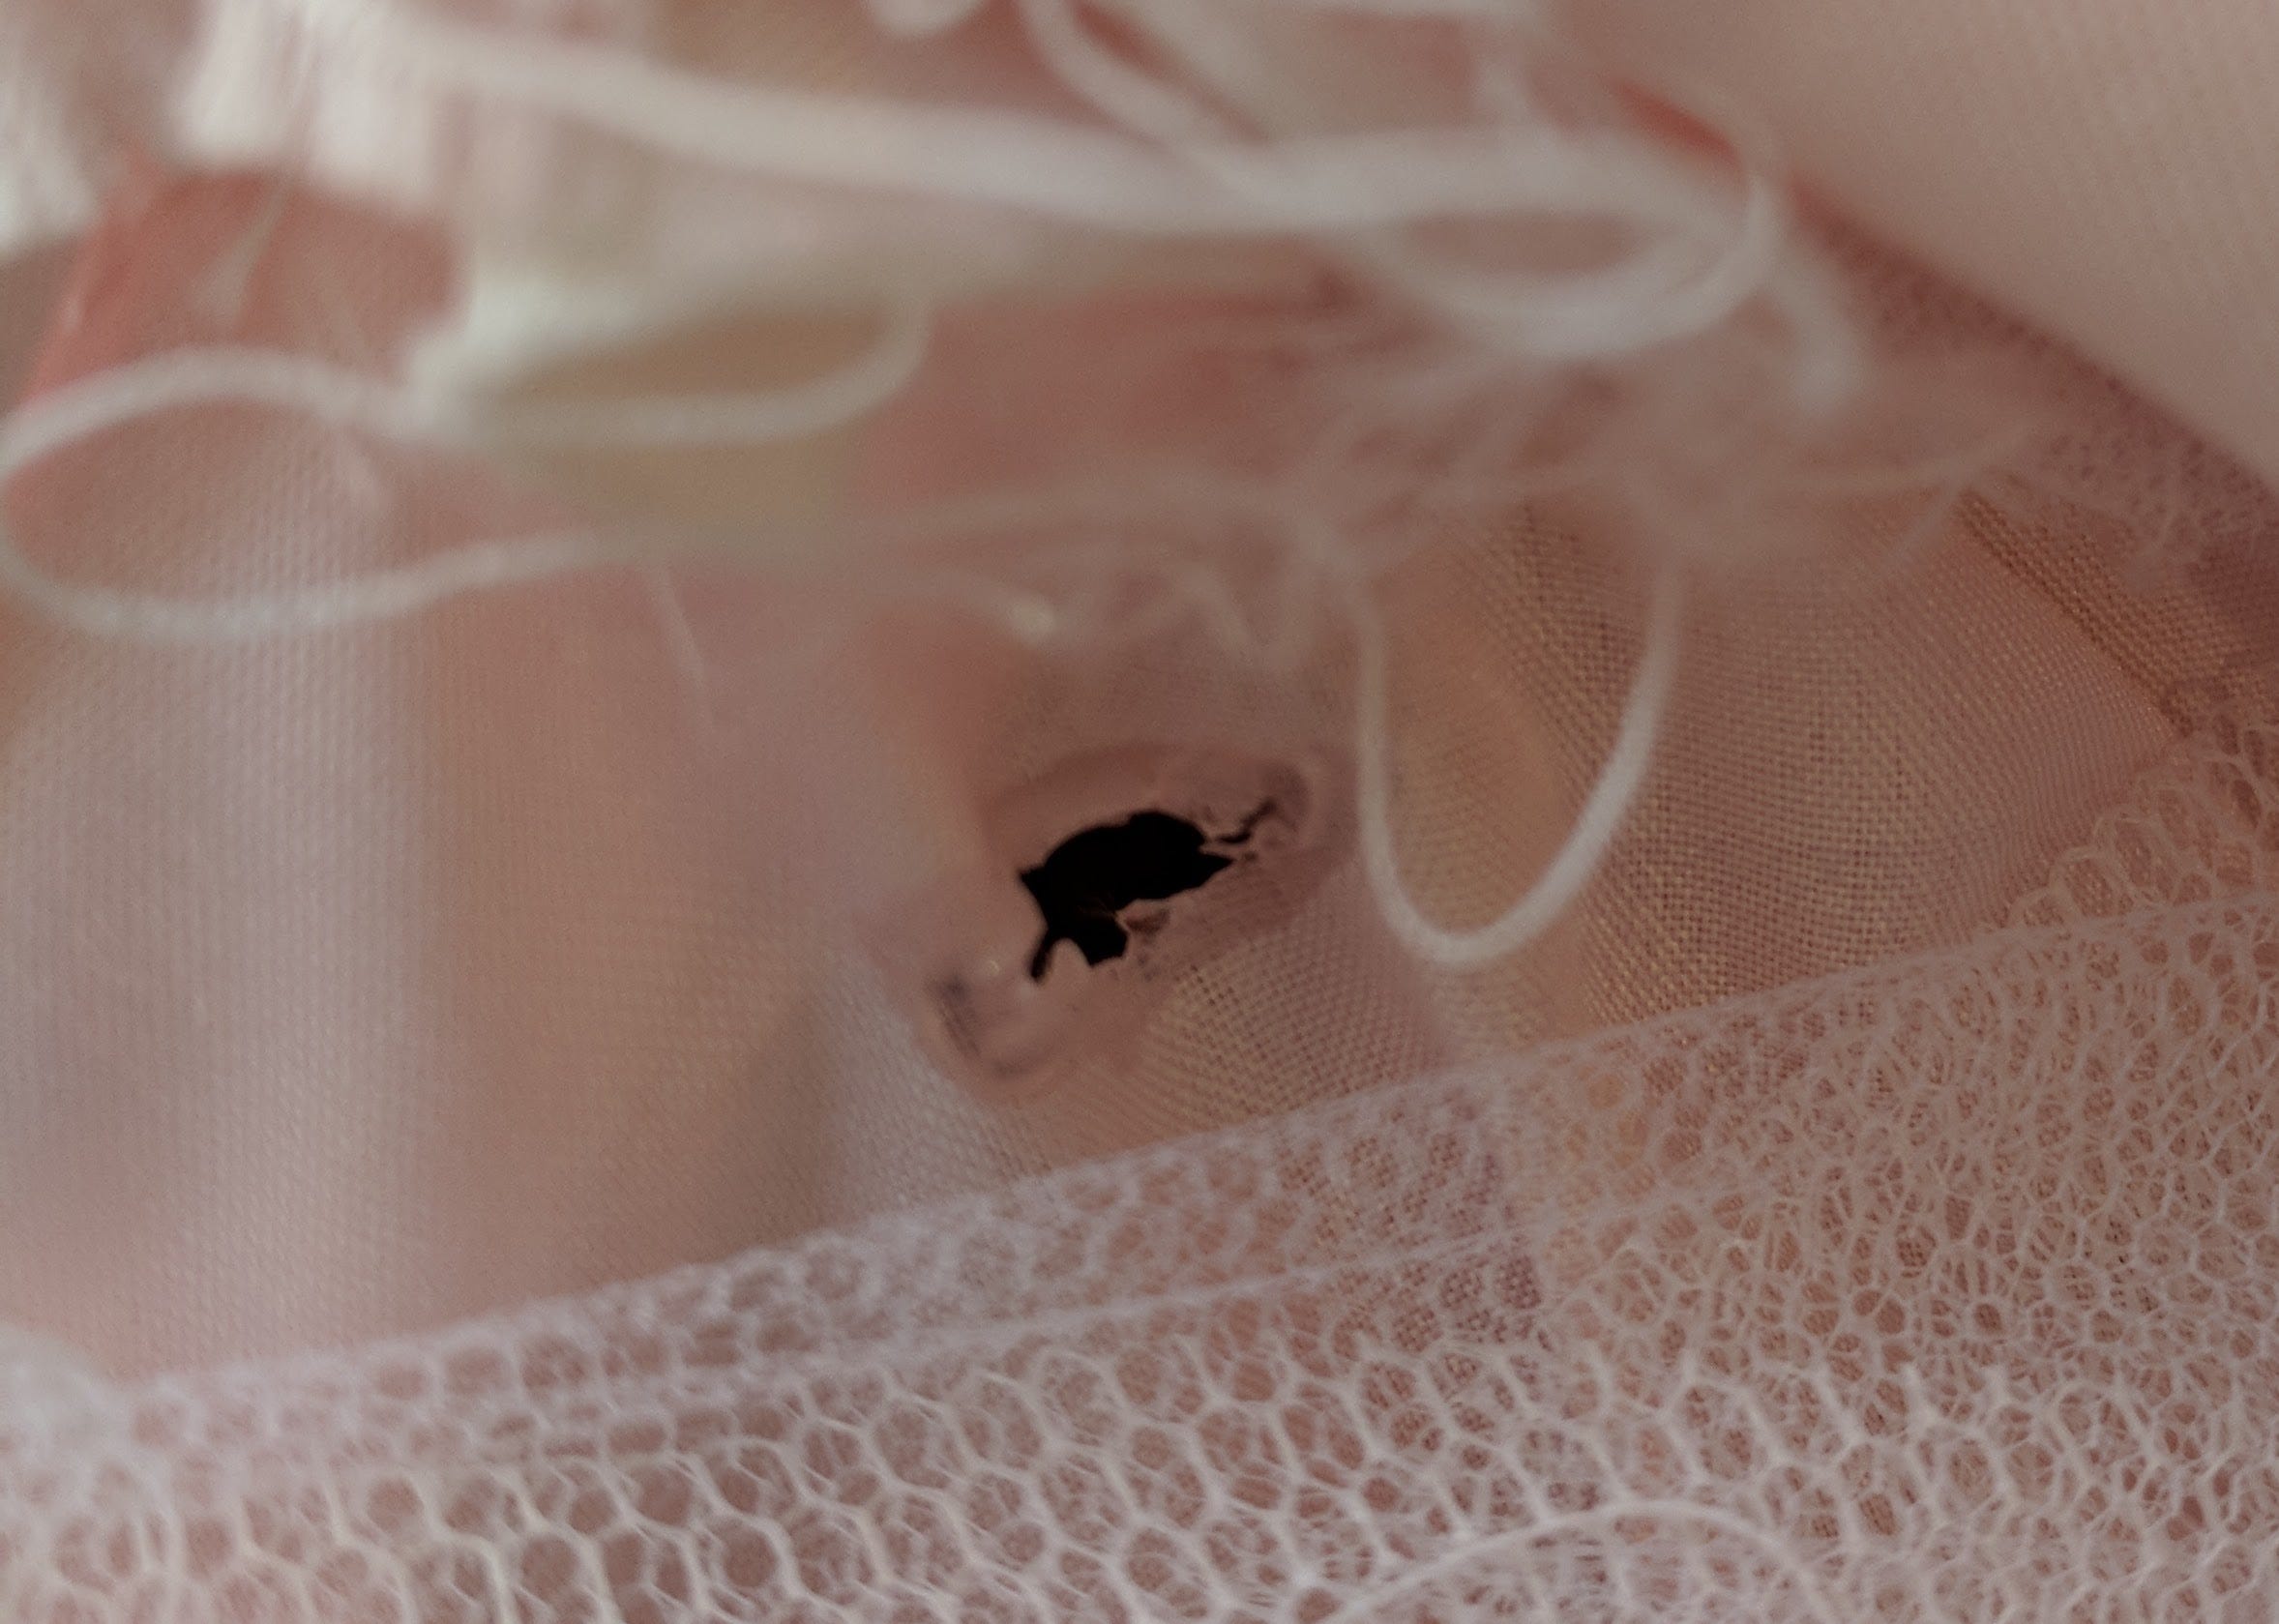 Just cutting a hole in my wedding dress, don’t mind me!